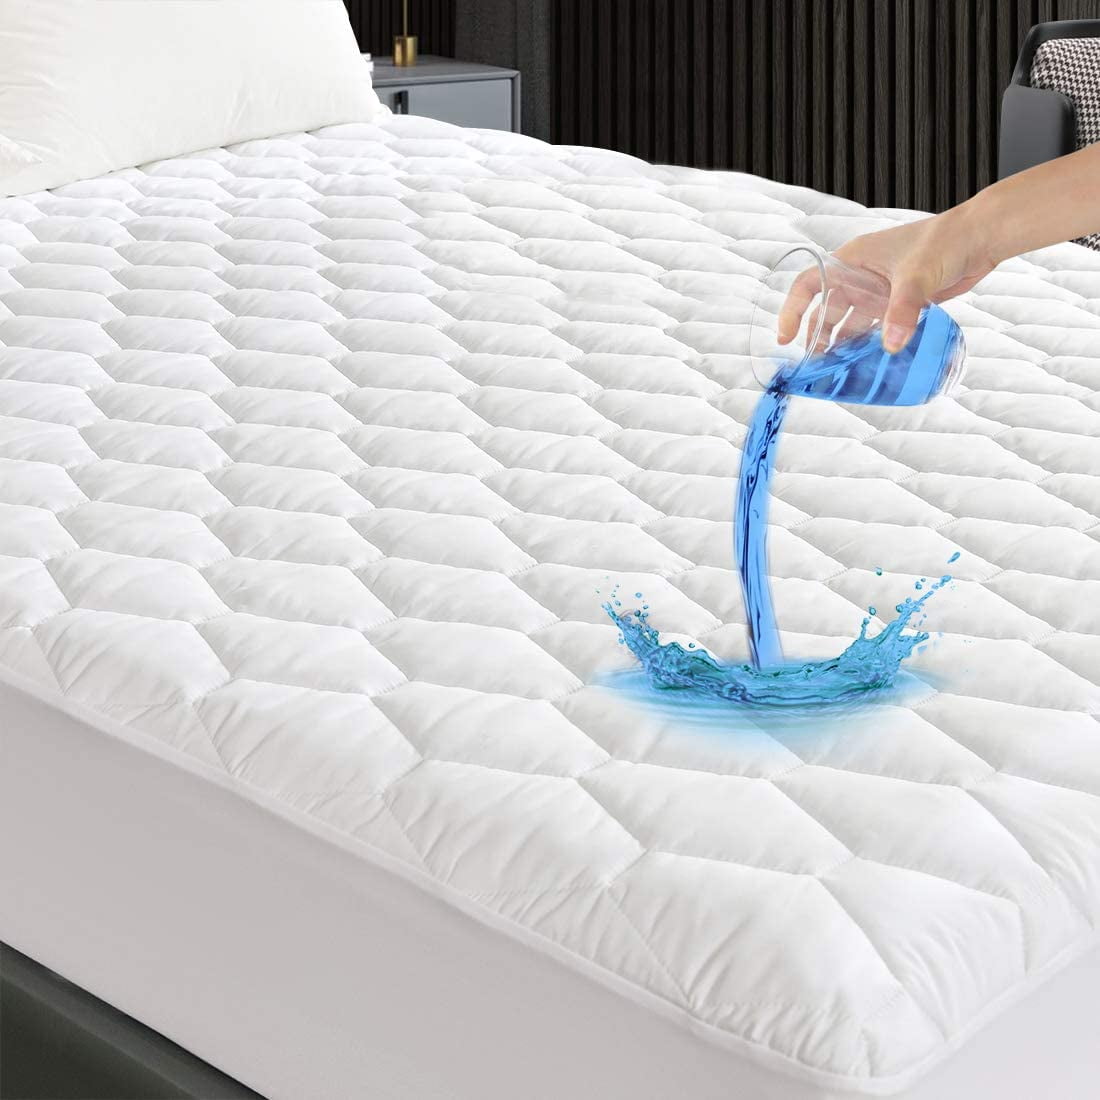 Mattress Cover Protector Breathable Waterproof Deep Fitted Pad Queen Twin Size